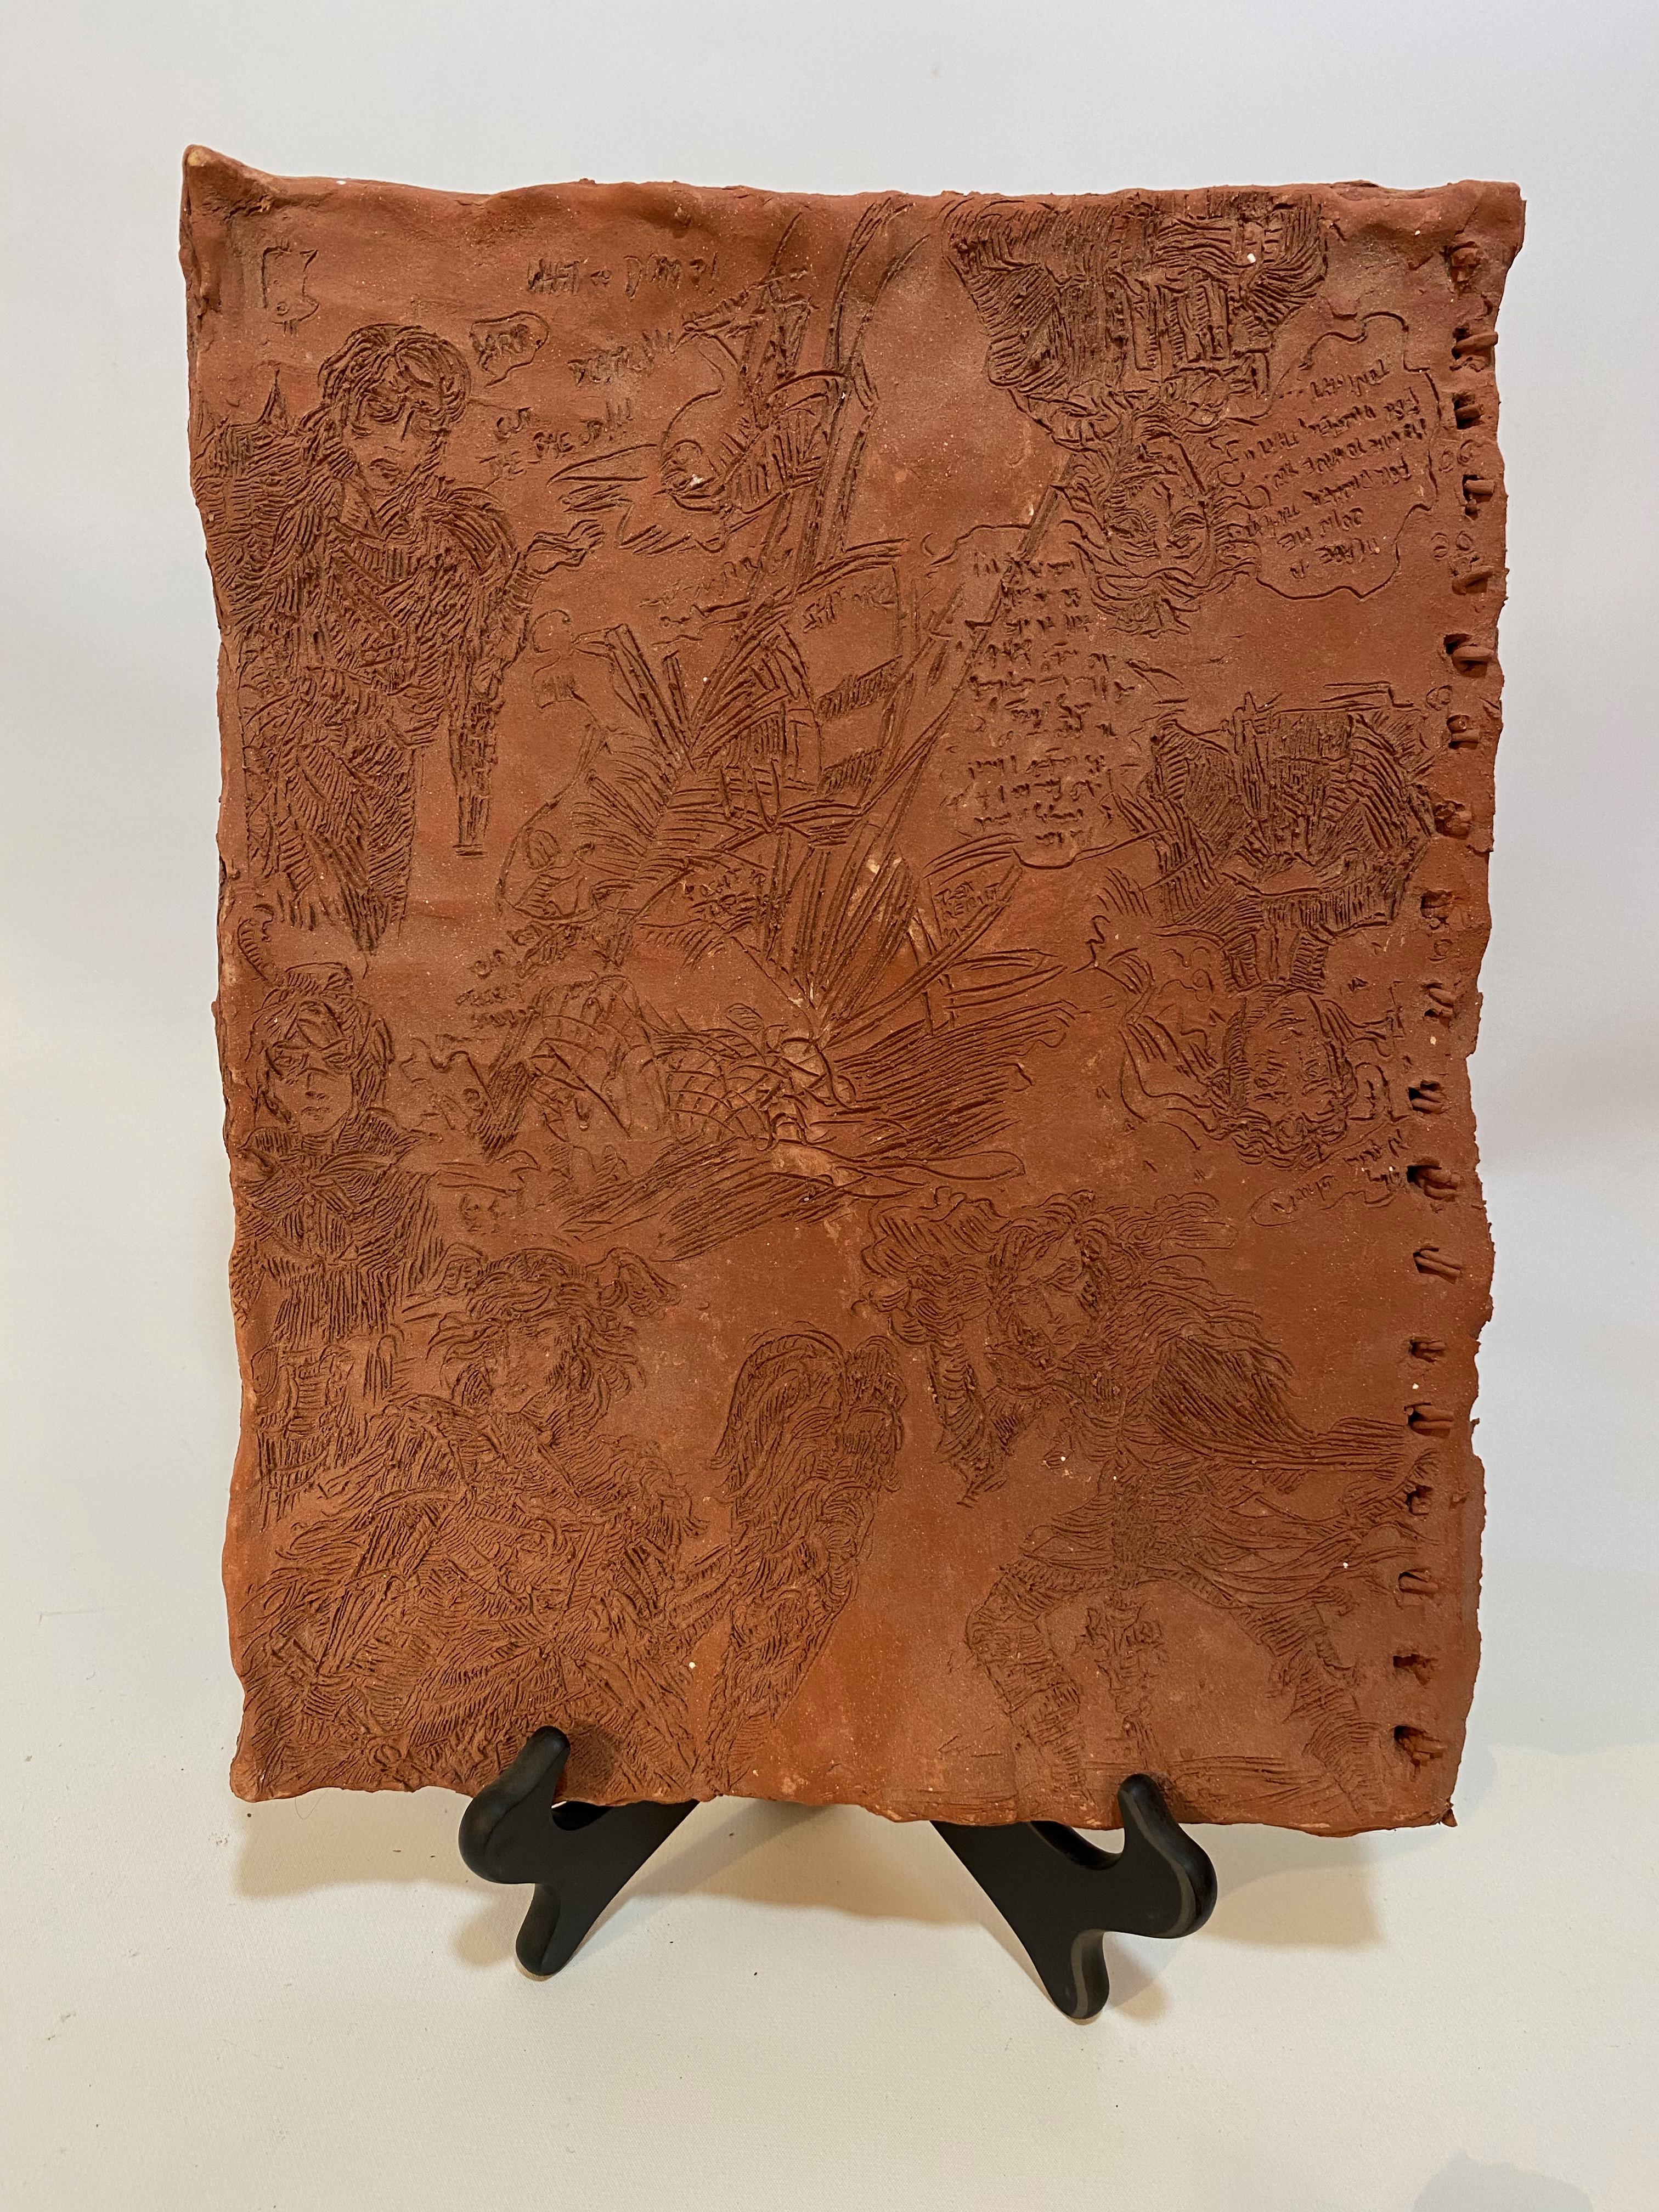 Terracotta Sketch Book Panels In Good Condition For Sale In Garnerville, NY